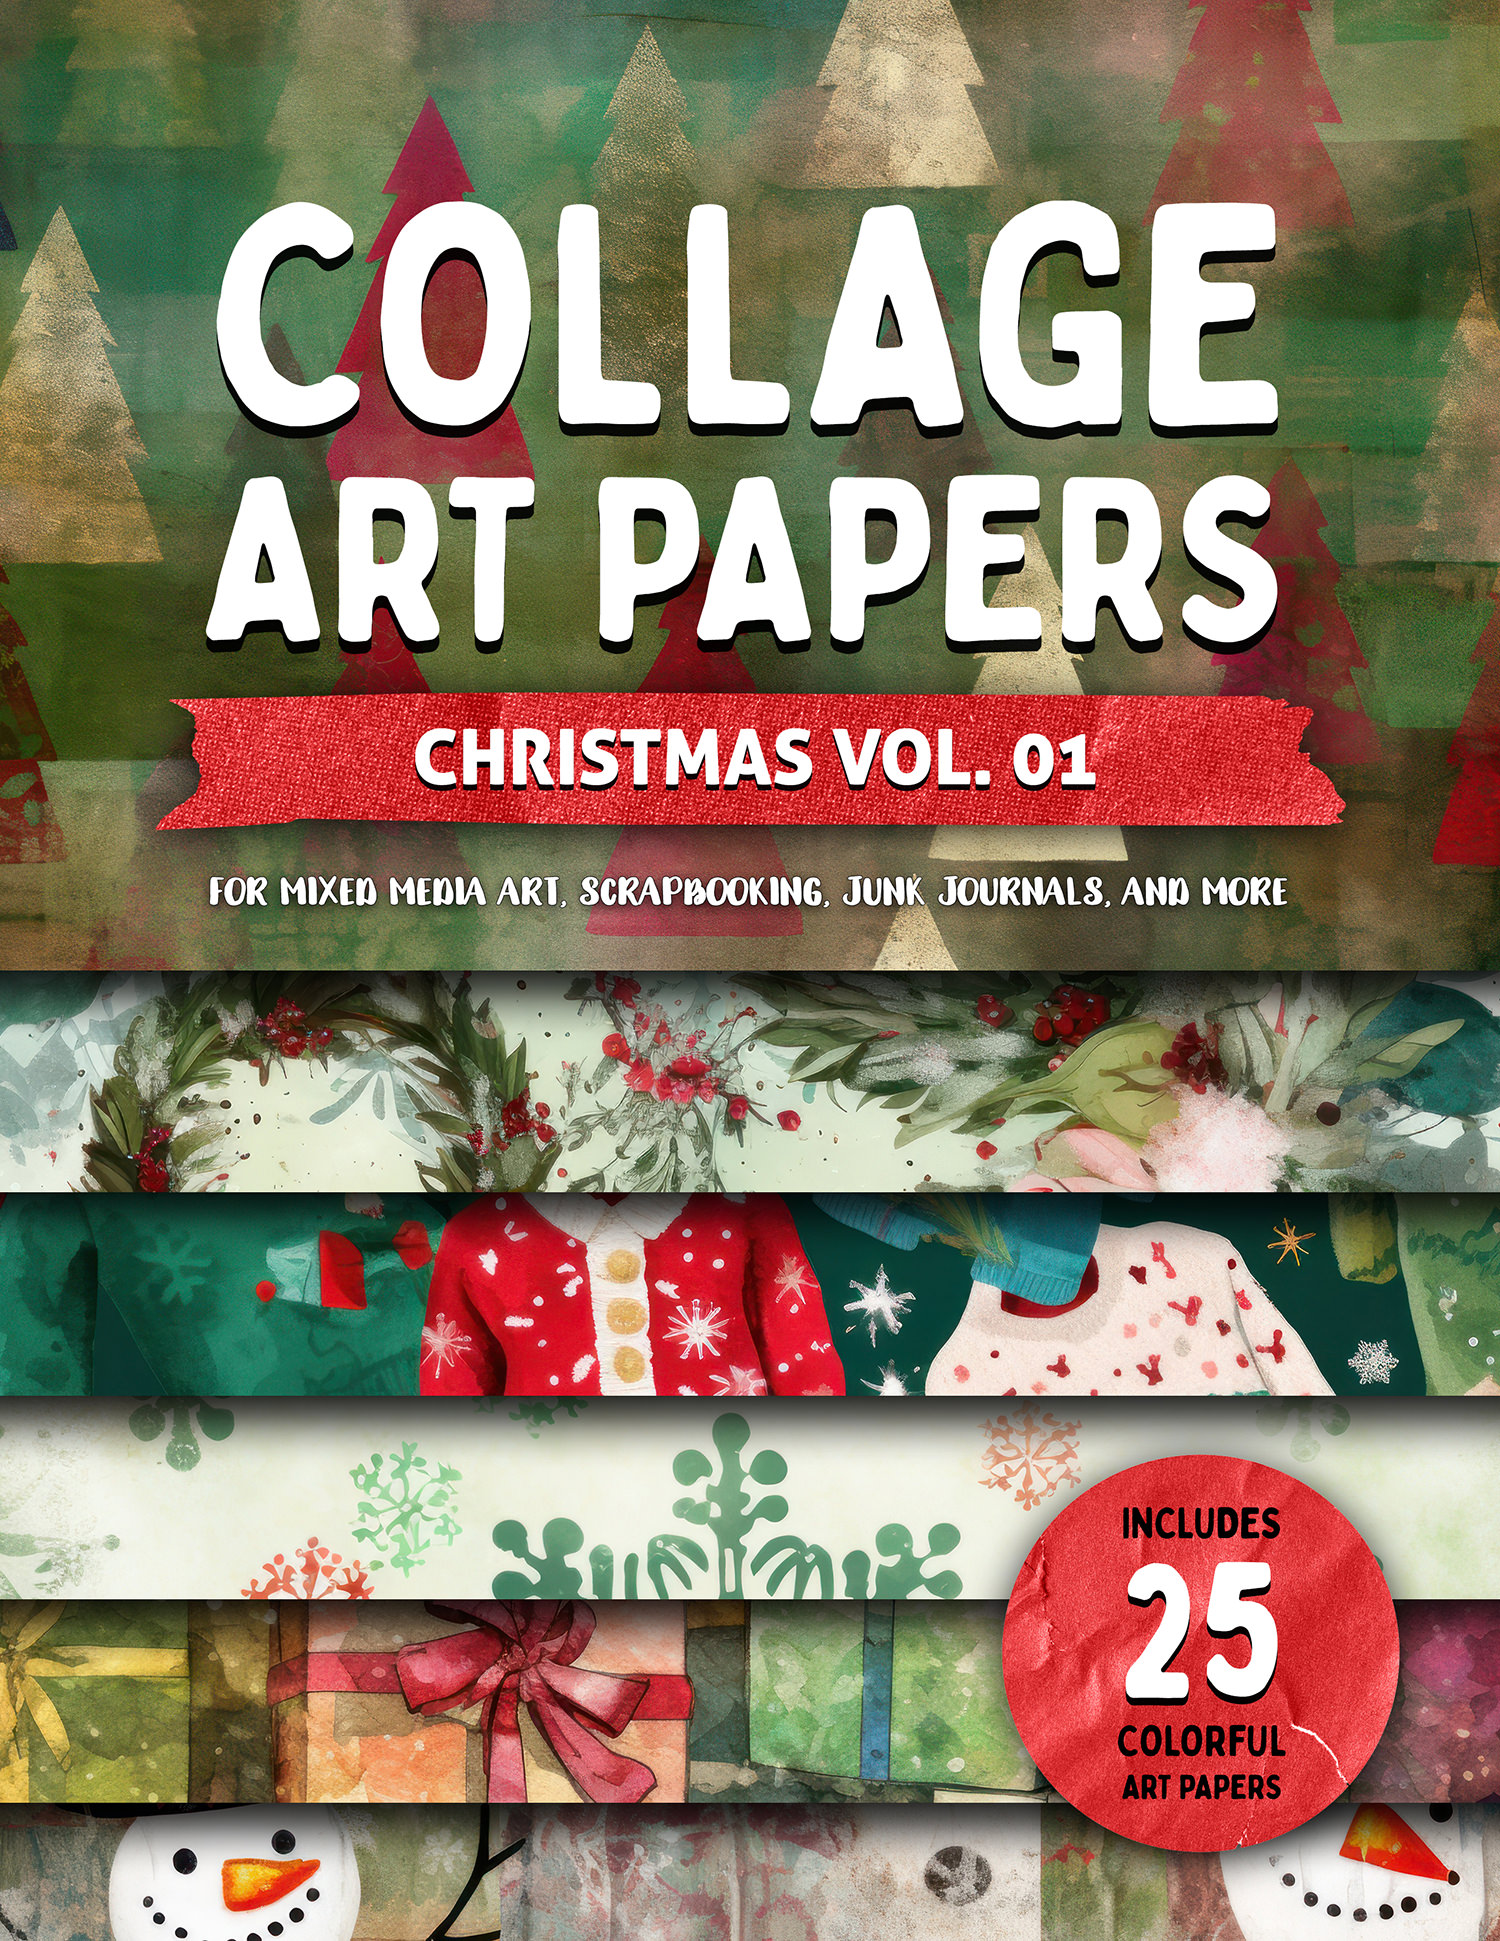 Collage Art Papers: Christmas Vol. 01